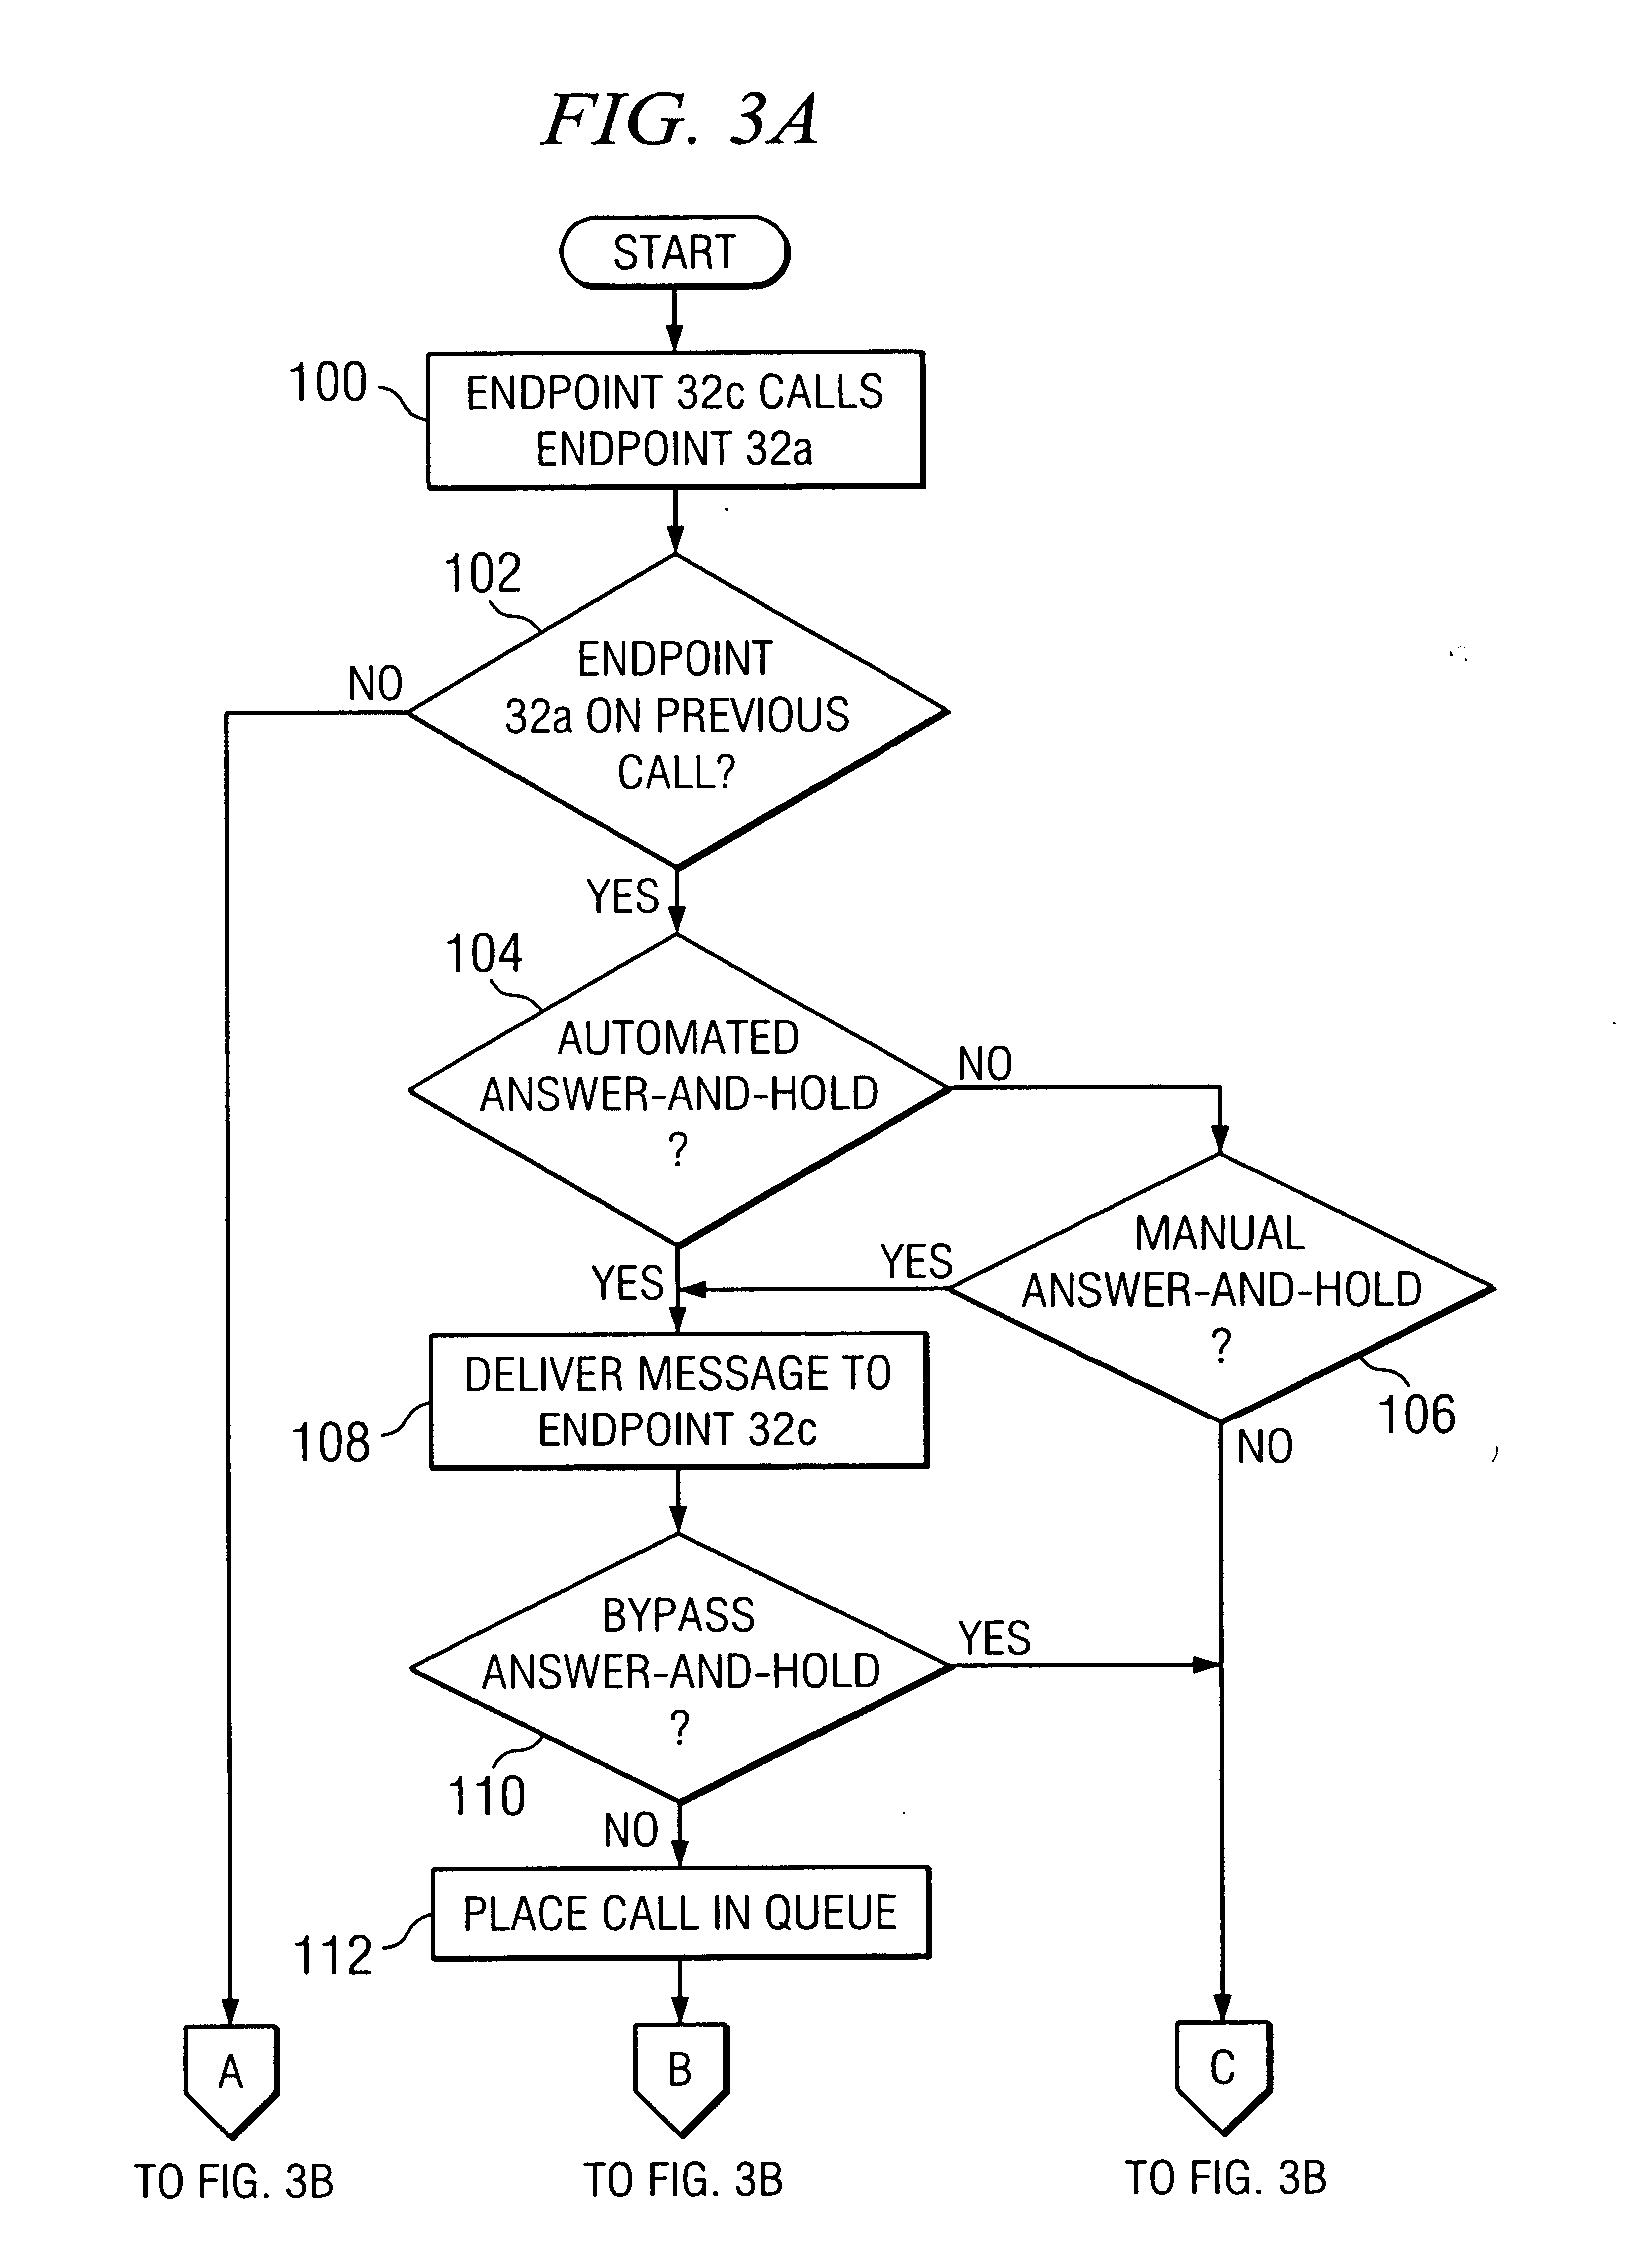 Method and system for the automated answering and holding of a call